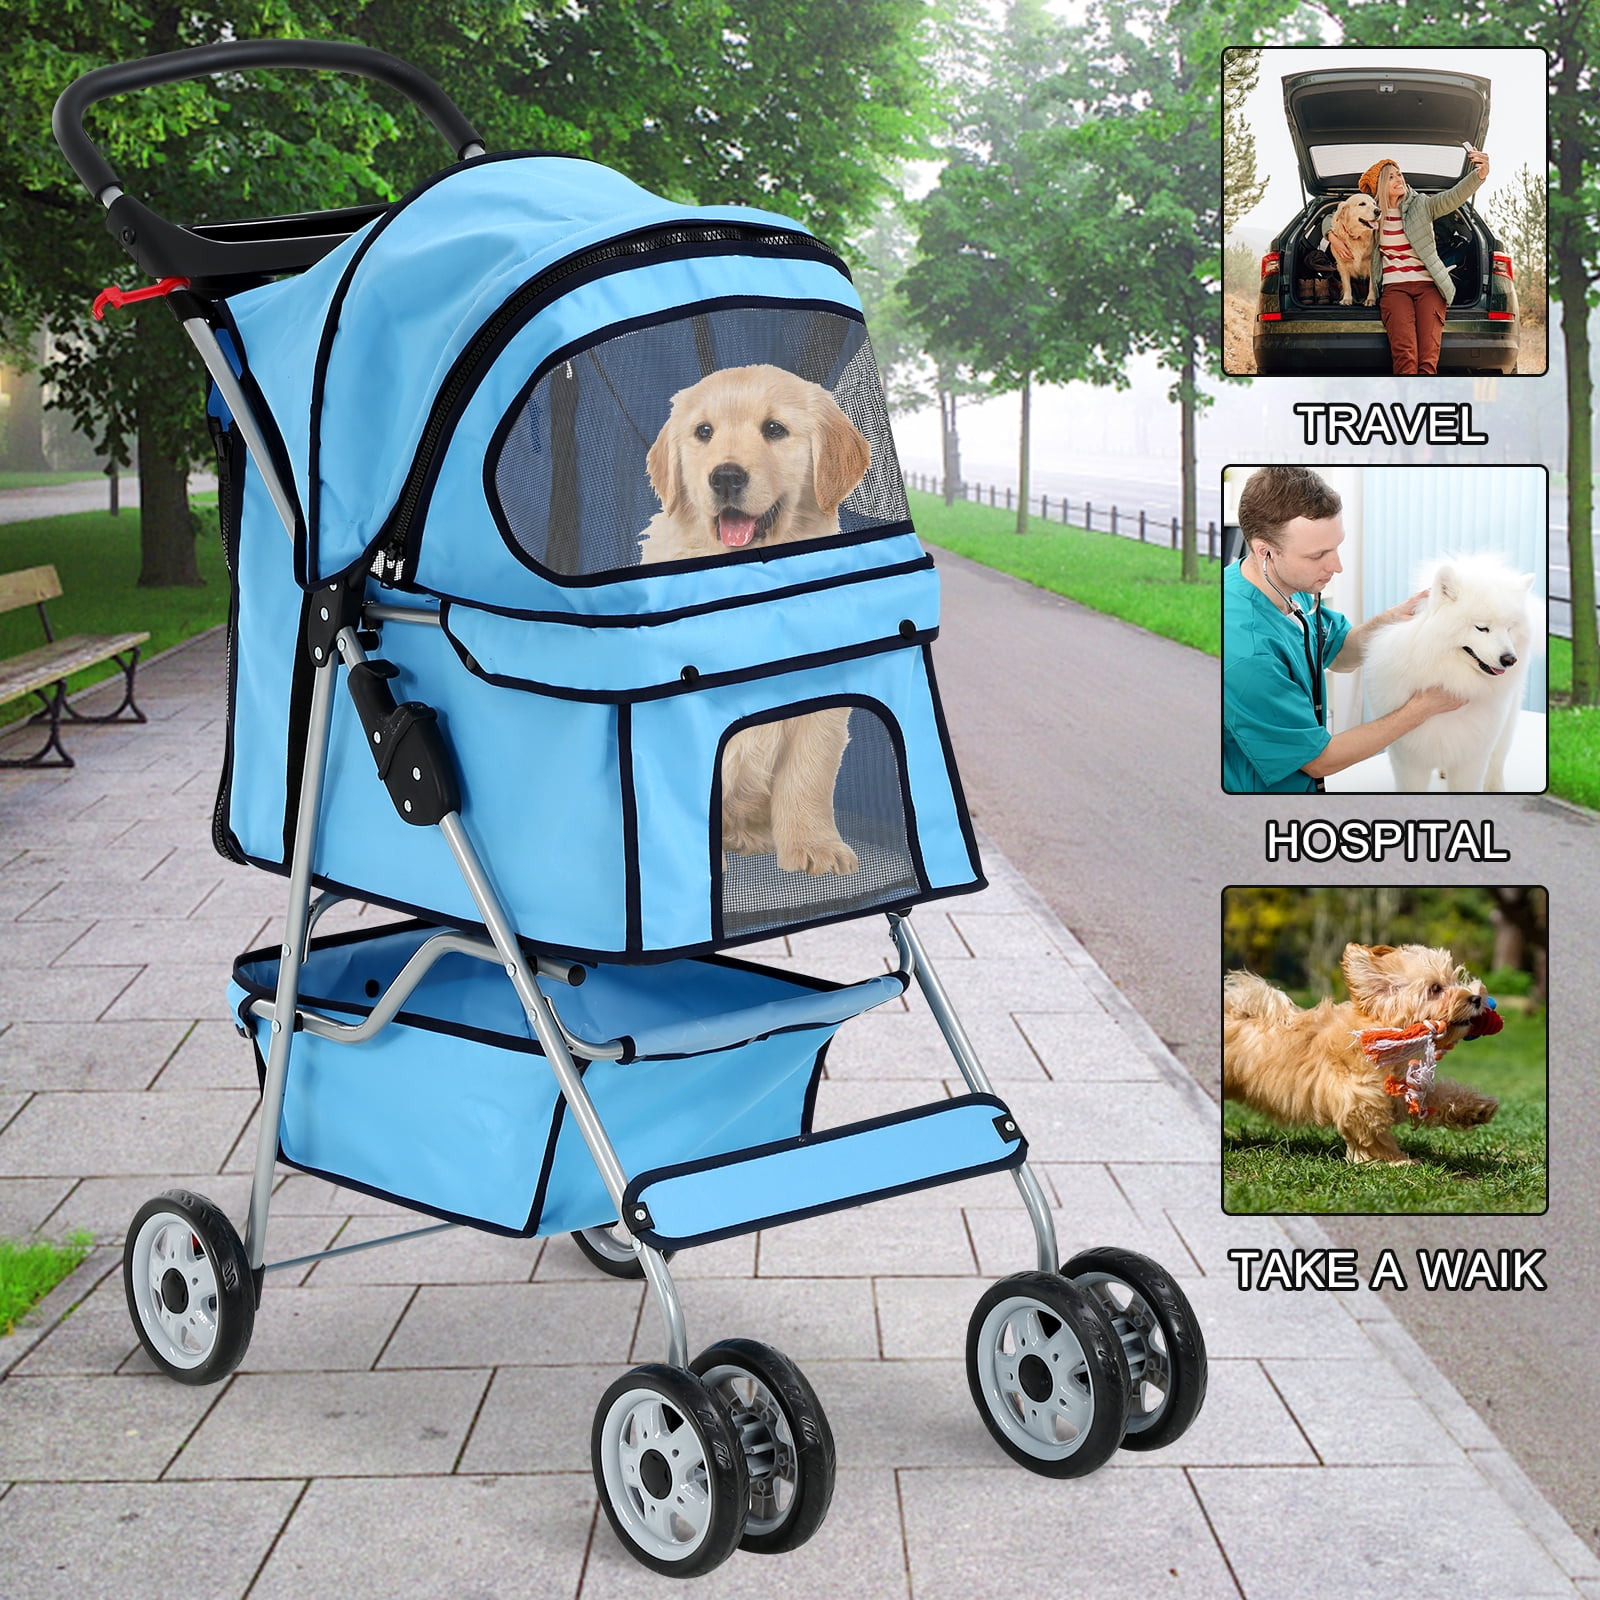 Pet Stroller 4 Wheels Dog Stroller Folding Carrier w/Cup Holders and  Raincover